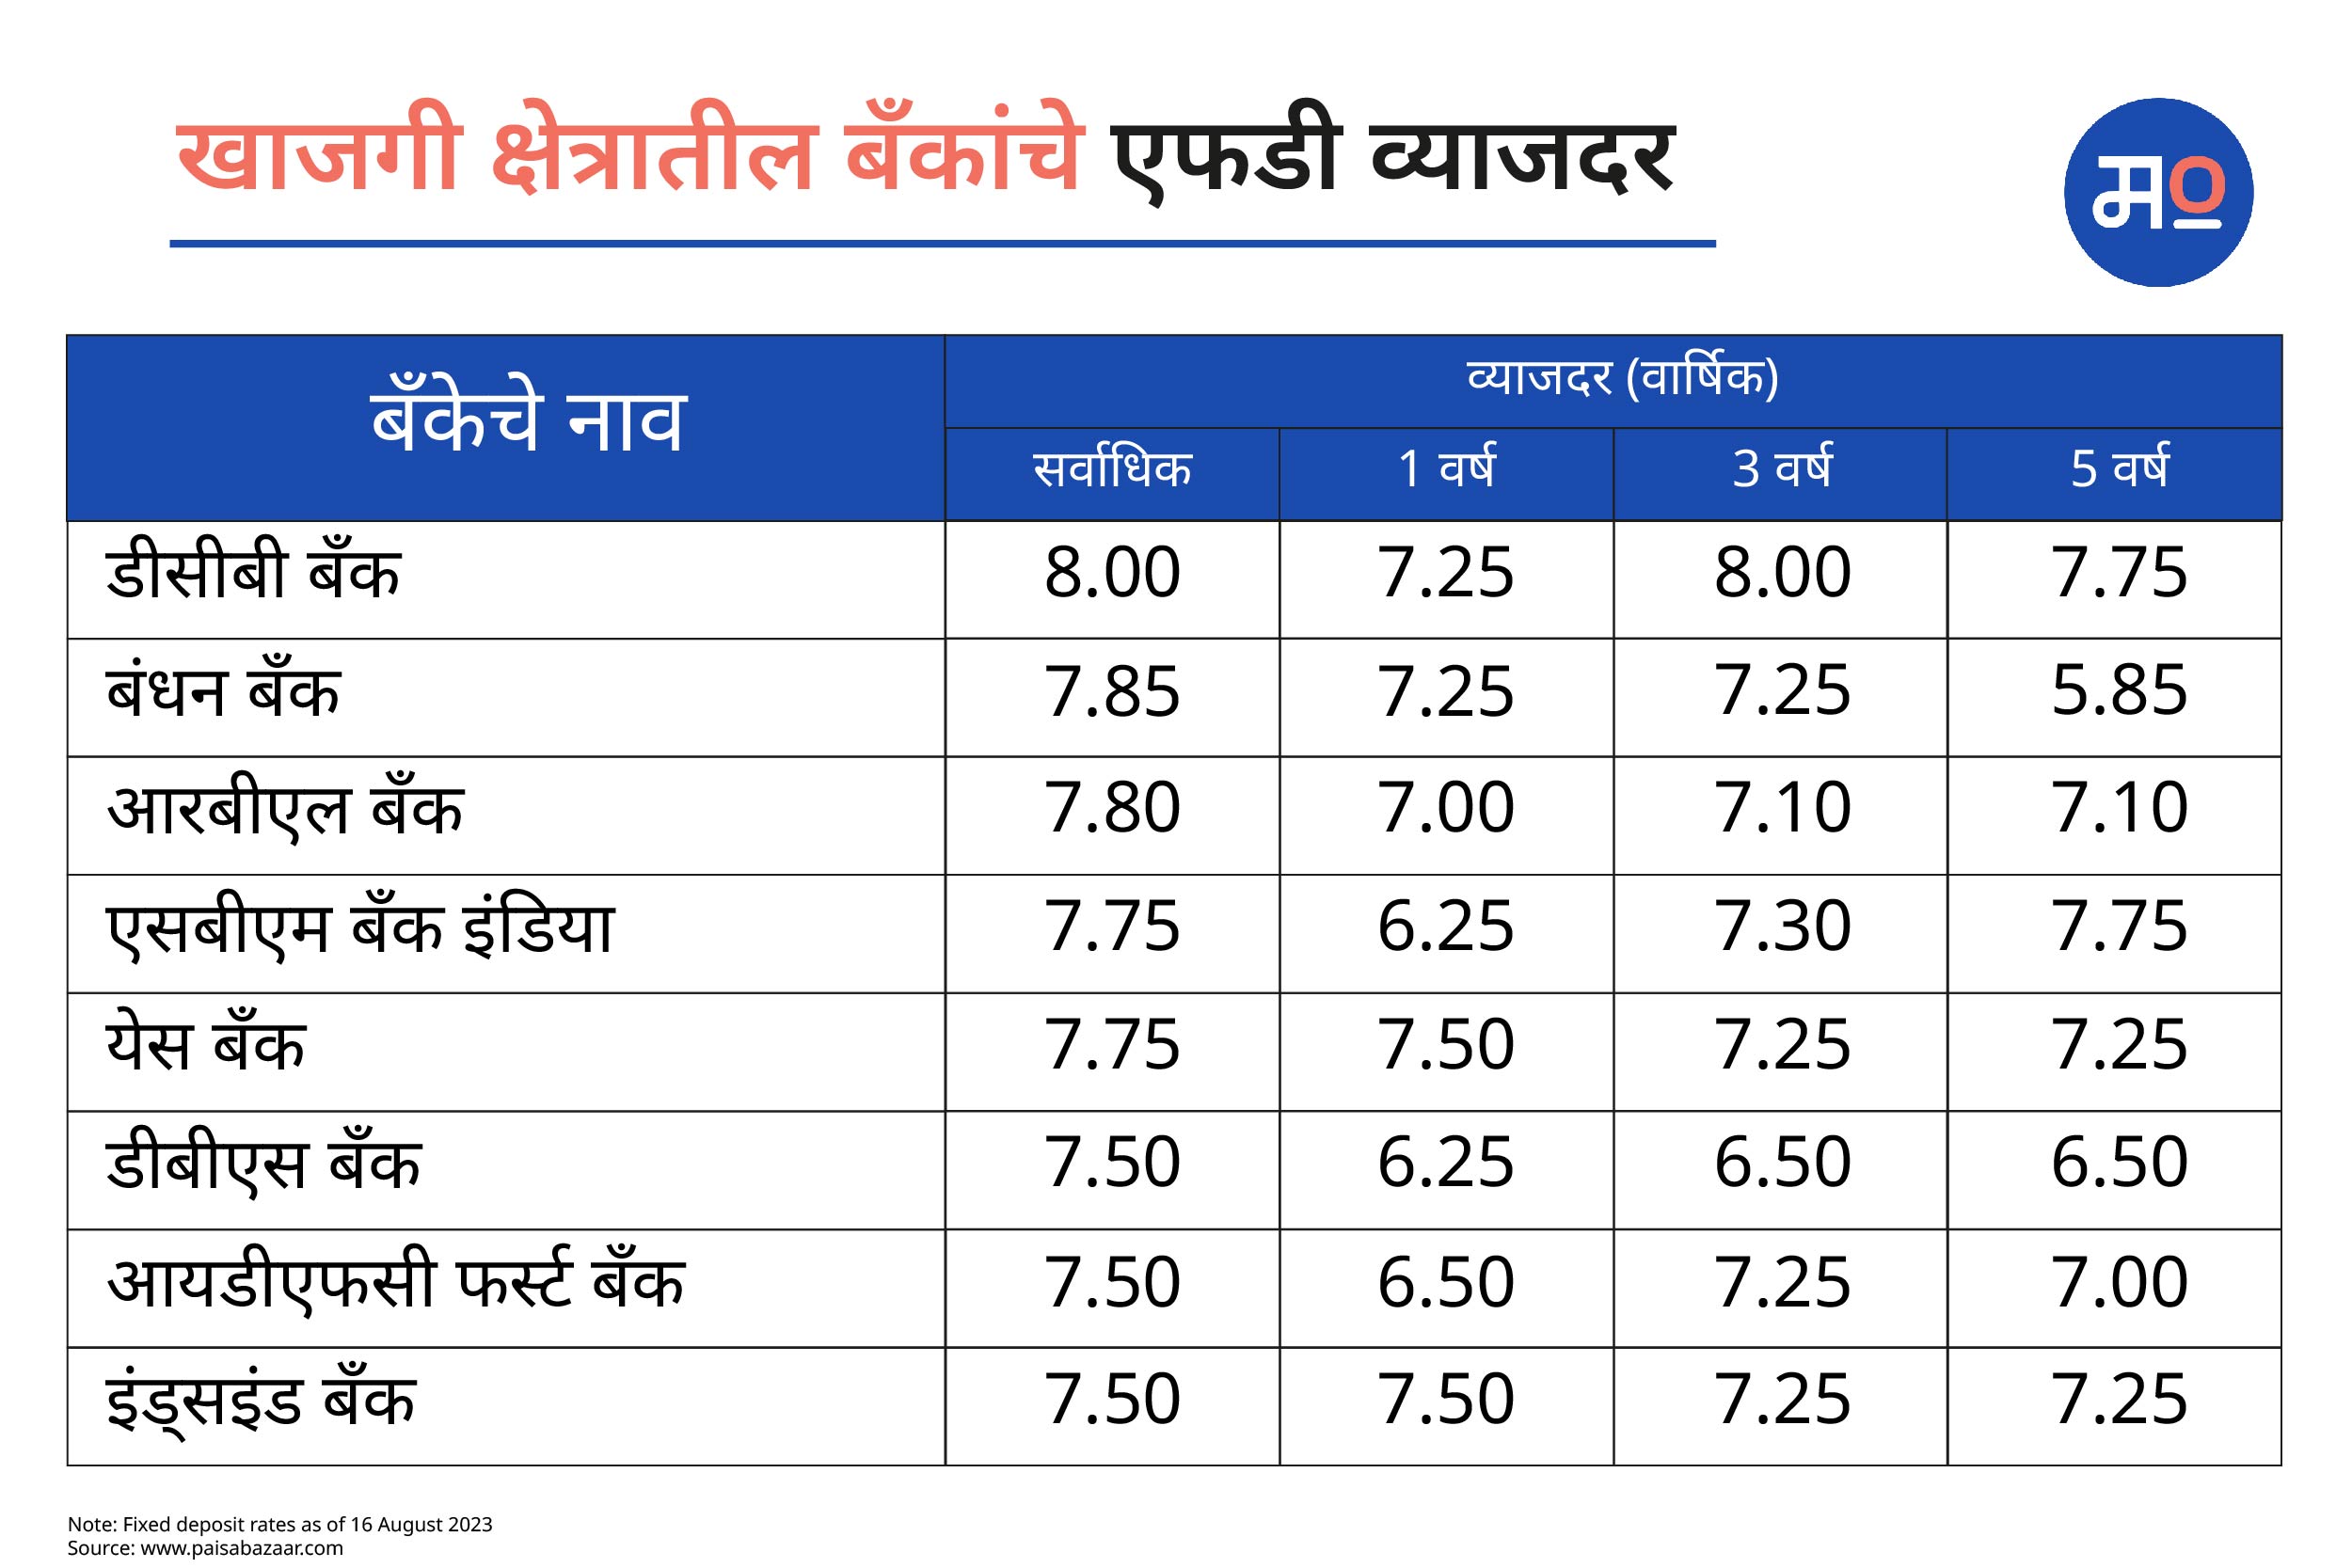 FD Interest Rates of Private Sector Banks